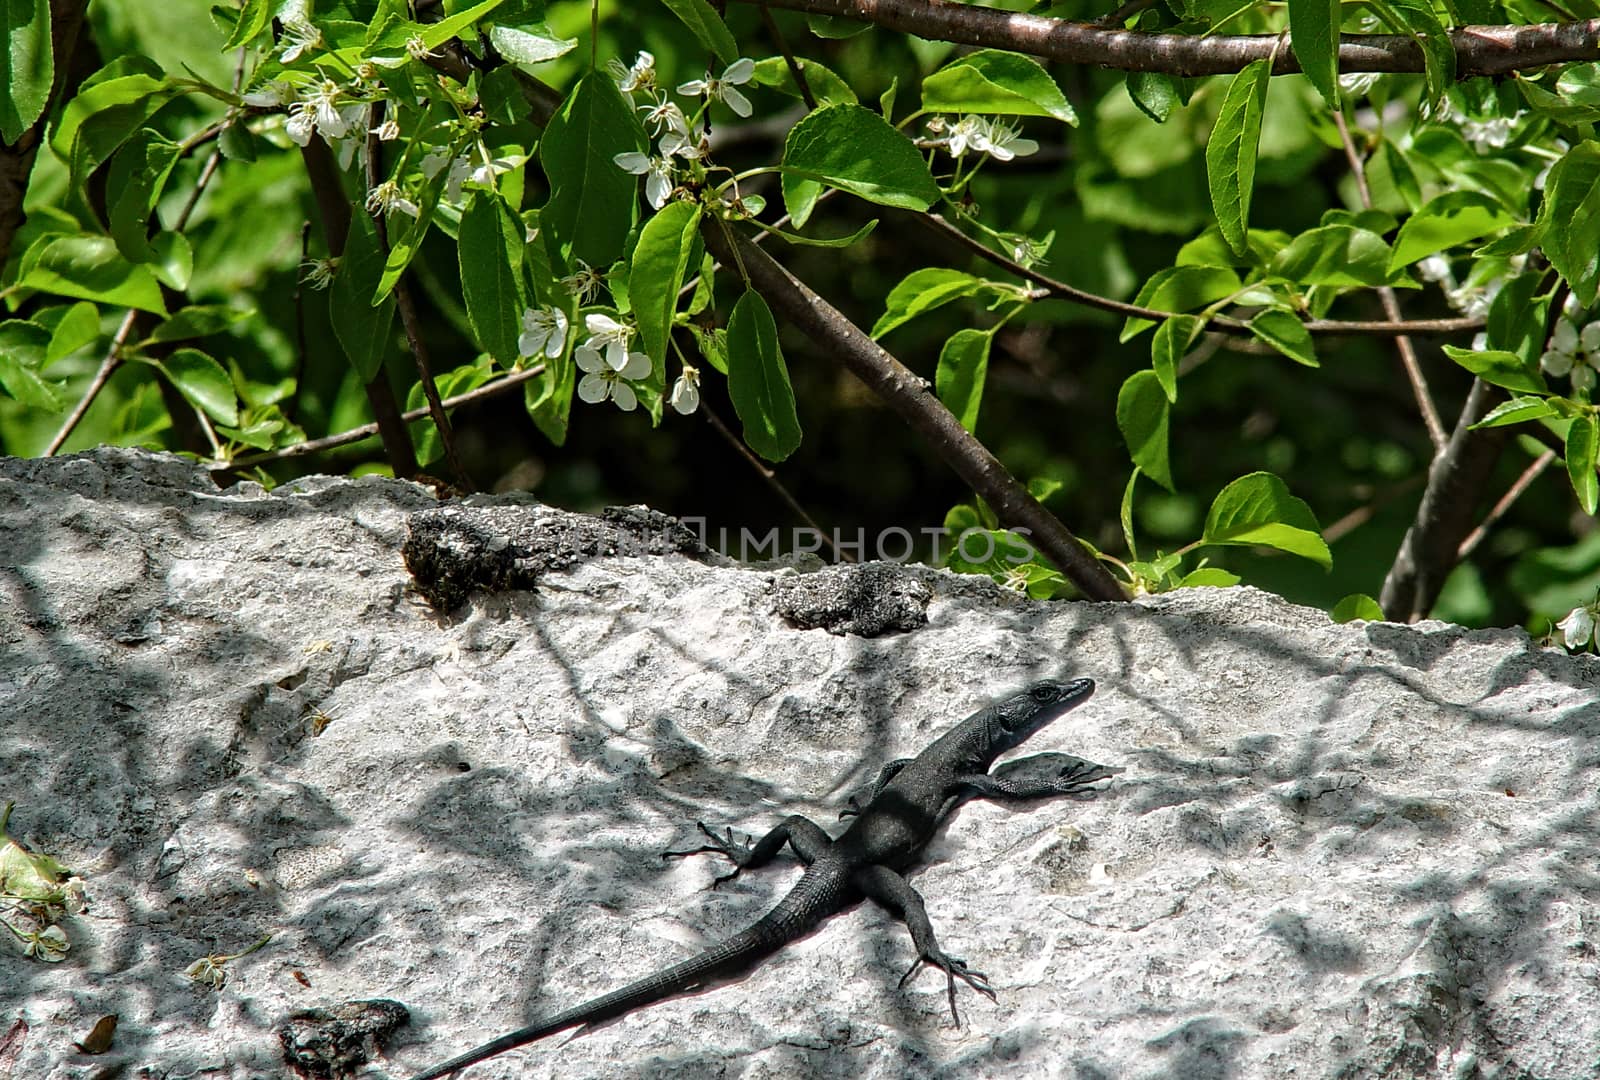 lizard sitting on a stone and basking in the sun. Spring day